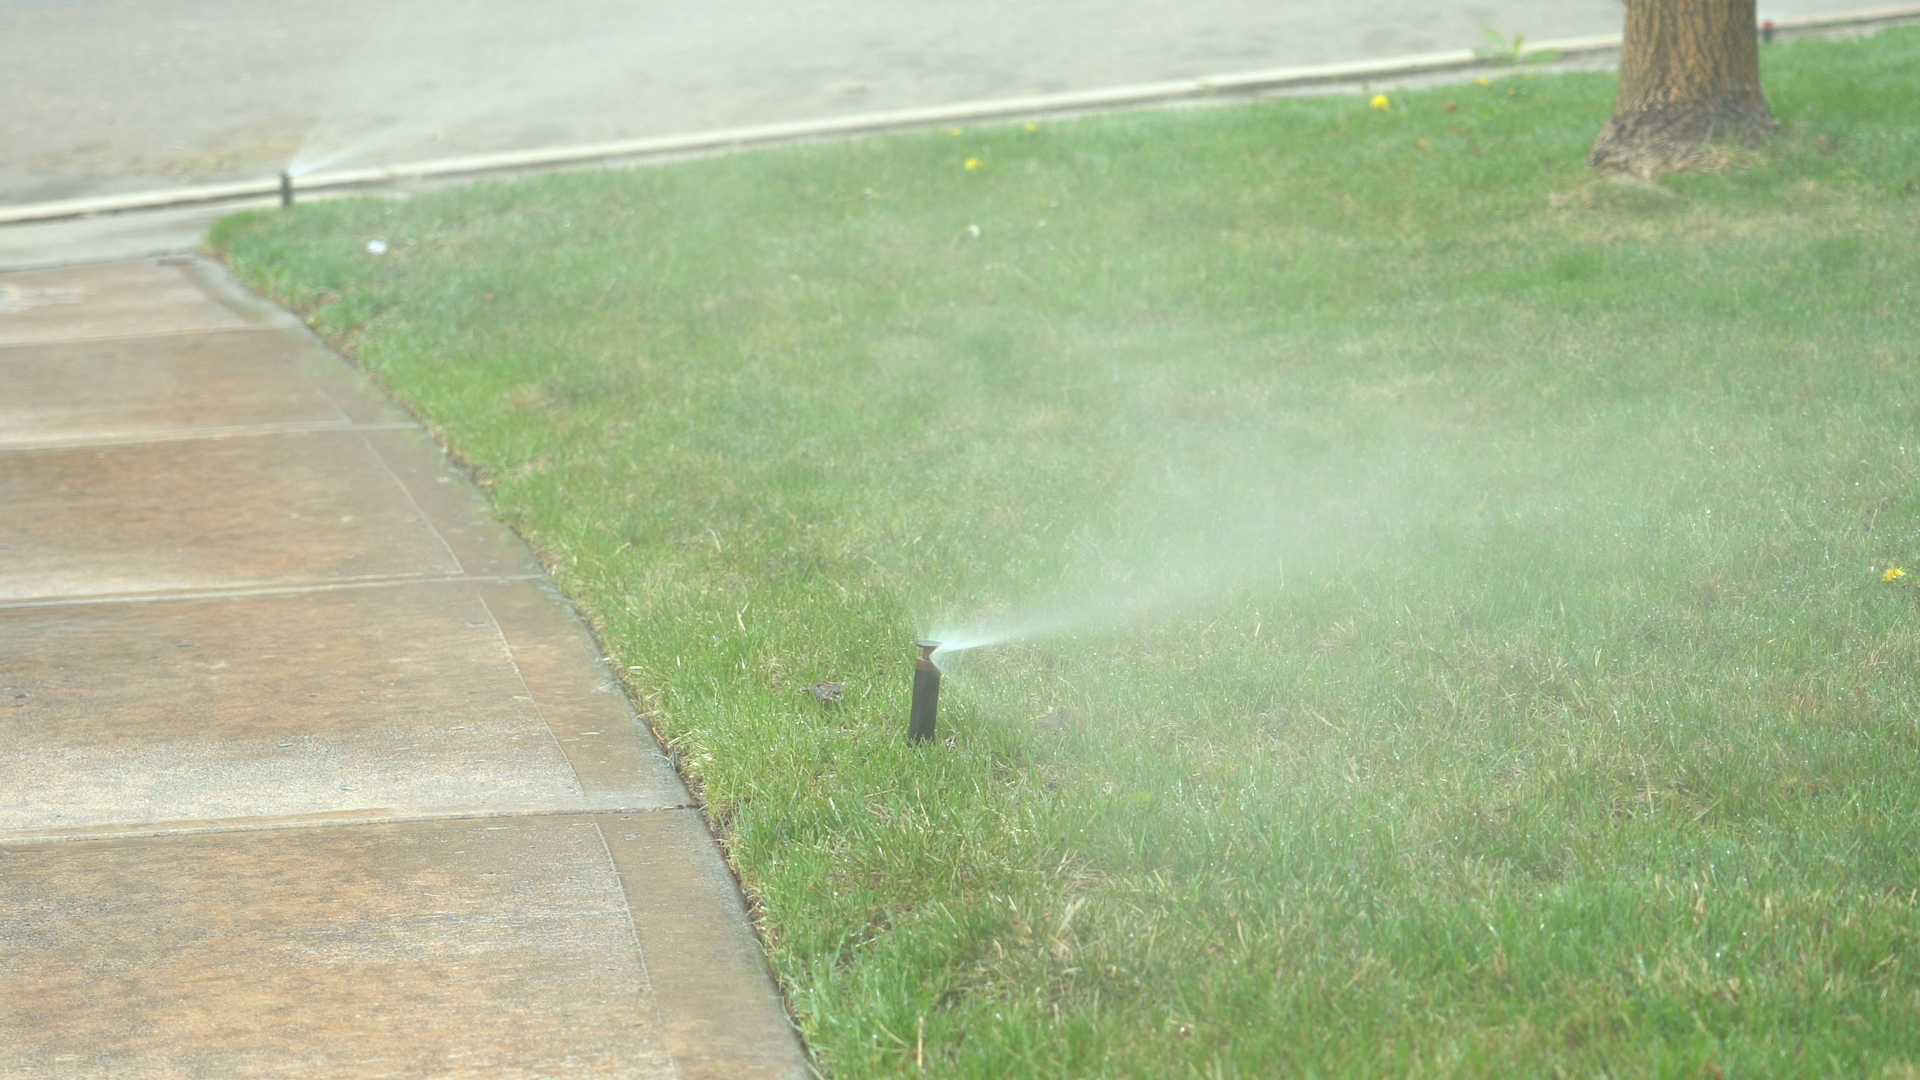 This picture shows a sprinkler on the grass with wind blowing the spray.